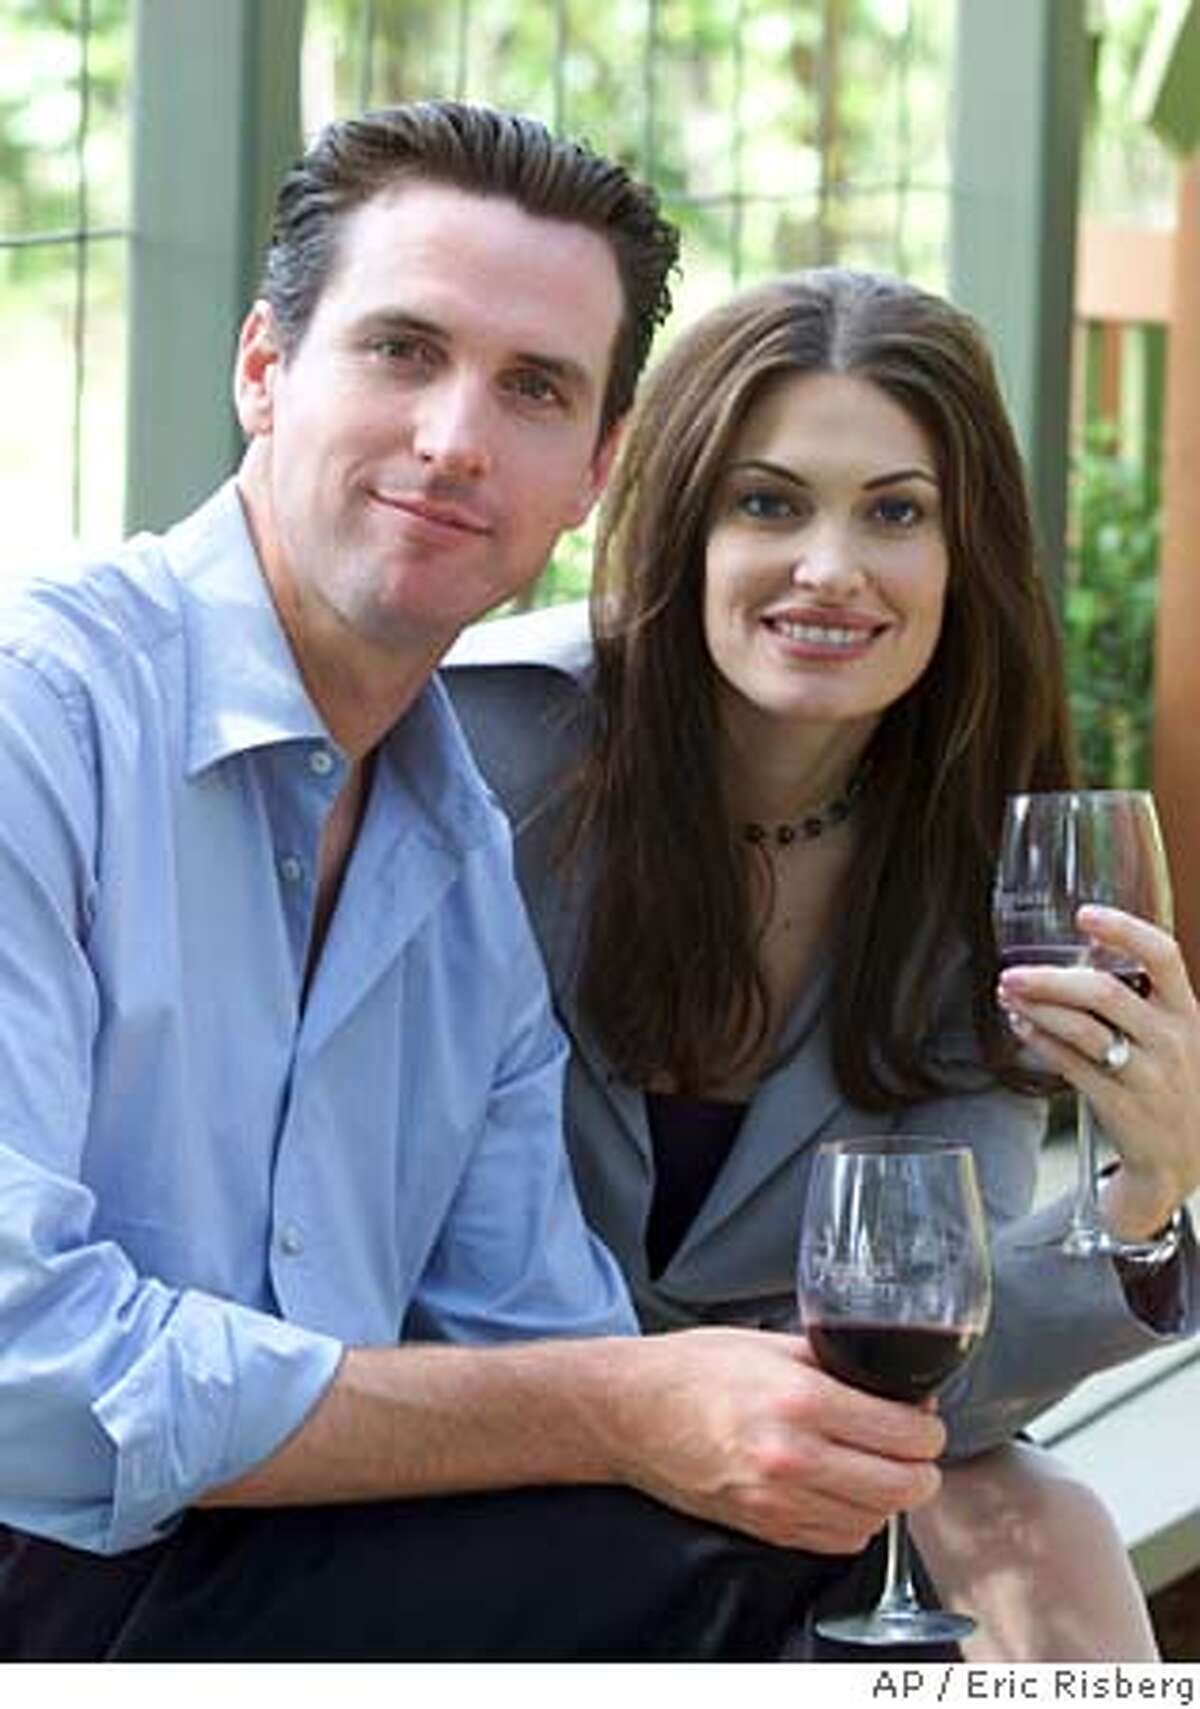 Gavin Newsom, left, and his wife, Kimberly Guilfoyle Newsom, right, pose for a picture at the PlumpJack winery in Oakville, Calif., Friday June 7, 2002. San Francisco Mayor Gavin Newsom and his wife, Court TV legal analyst Kimberly Guilfoyle Newsom, are filing for divorce after three years of marriage. In a joint statement issued Wednesday by the mayor's office, the Newsoms cited the strain posed by their high-profile, bicoastal careers as the reason for the split. (AP Photo/Eric Risberg) A JUNE 7 2002 PHOTO Ran on: 01-06-2005 Mayor Gavin Newsom and wife Kimberly Guilfoyle Newsom are getting divorced.